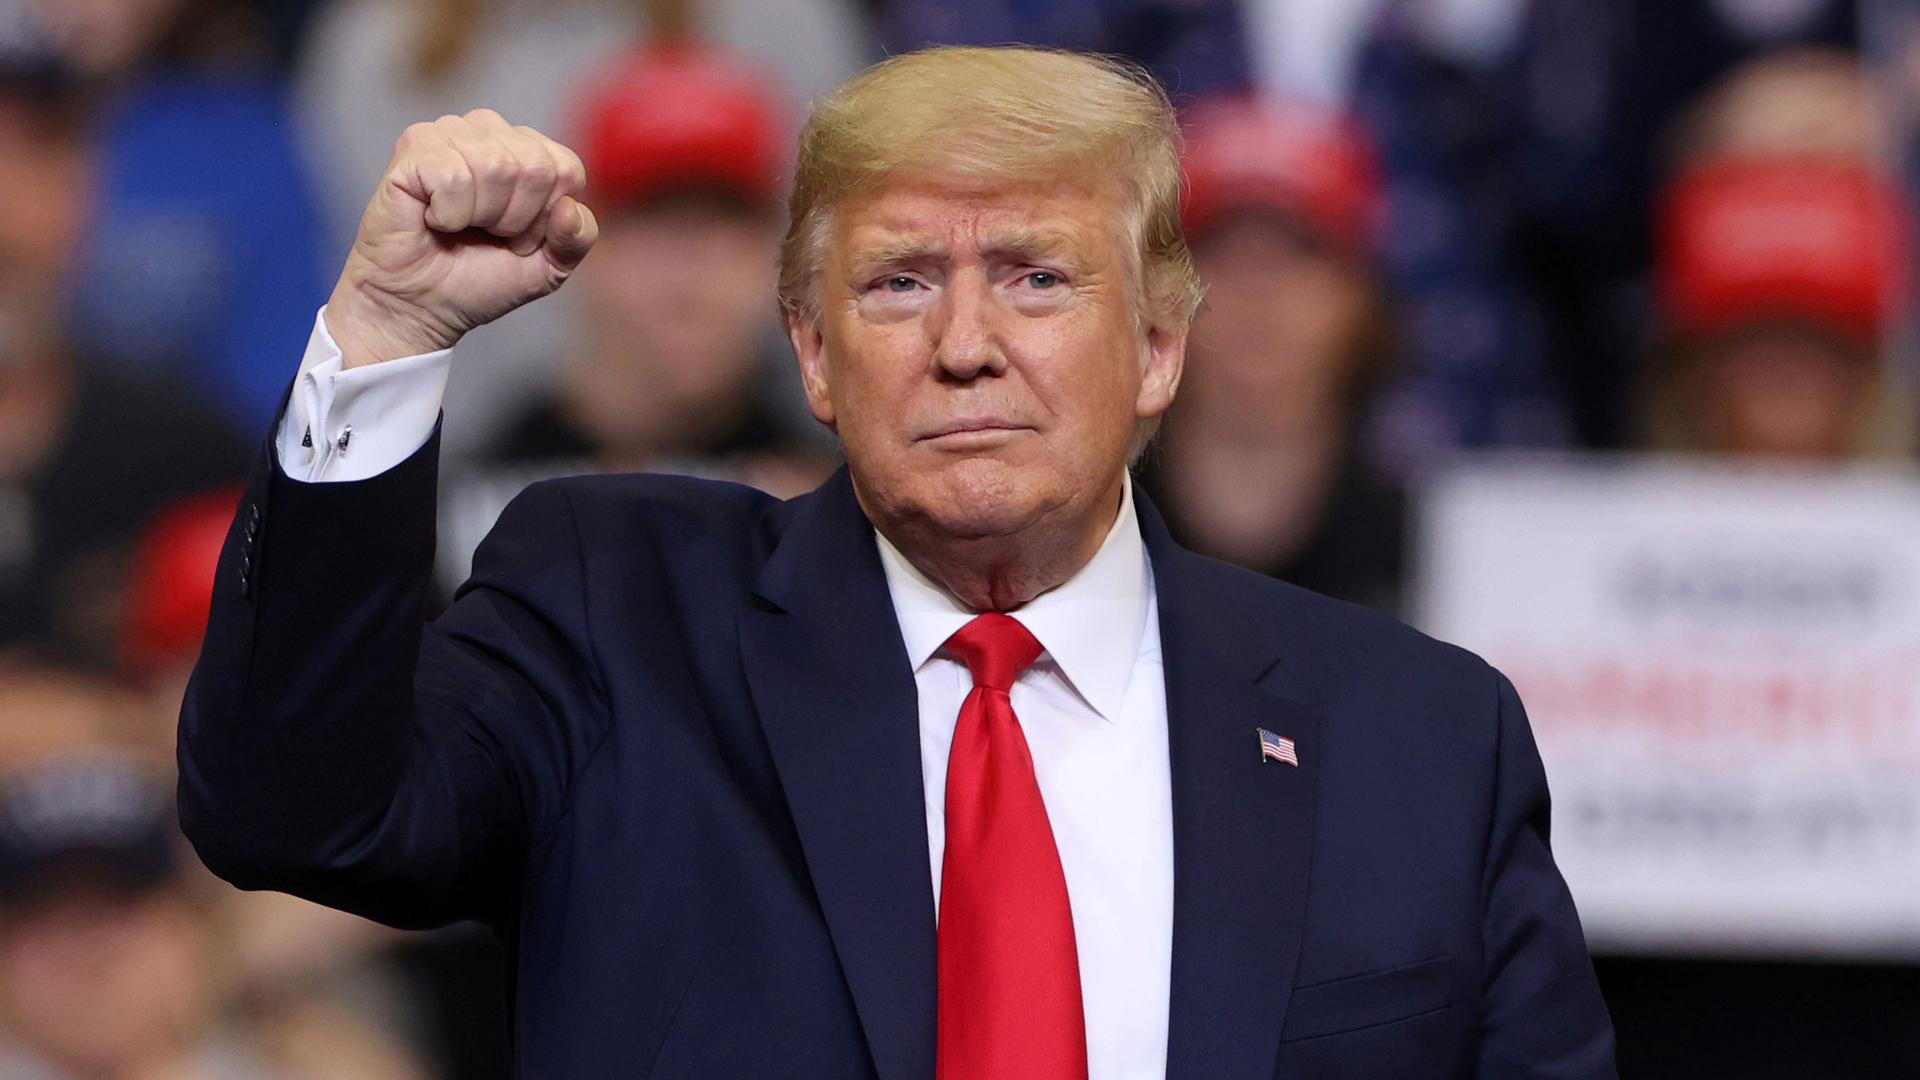 US President Donald Trump is shown wearing a blue jacket and red tie with his right hand raised in a fist.